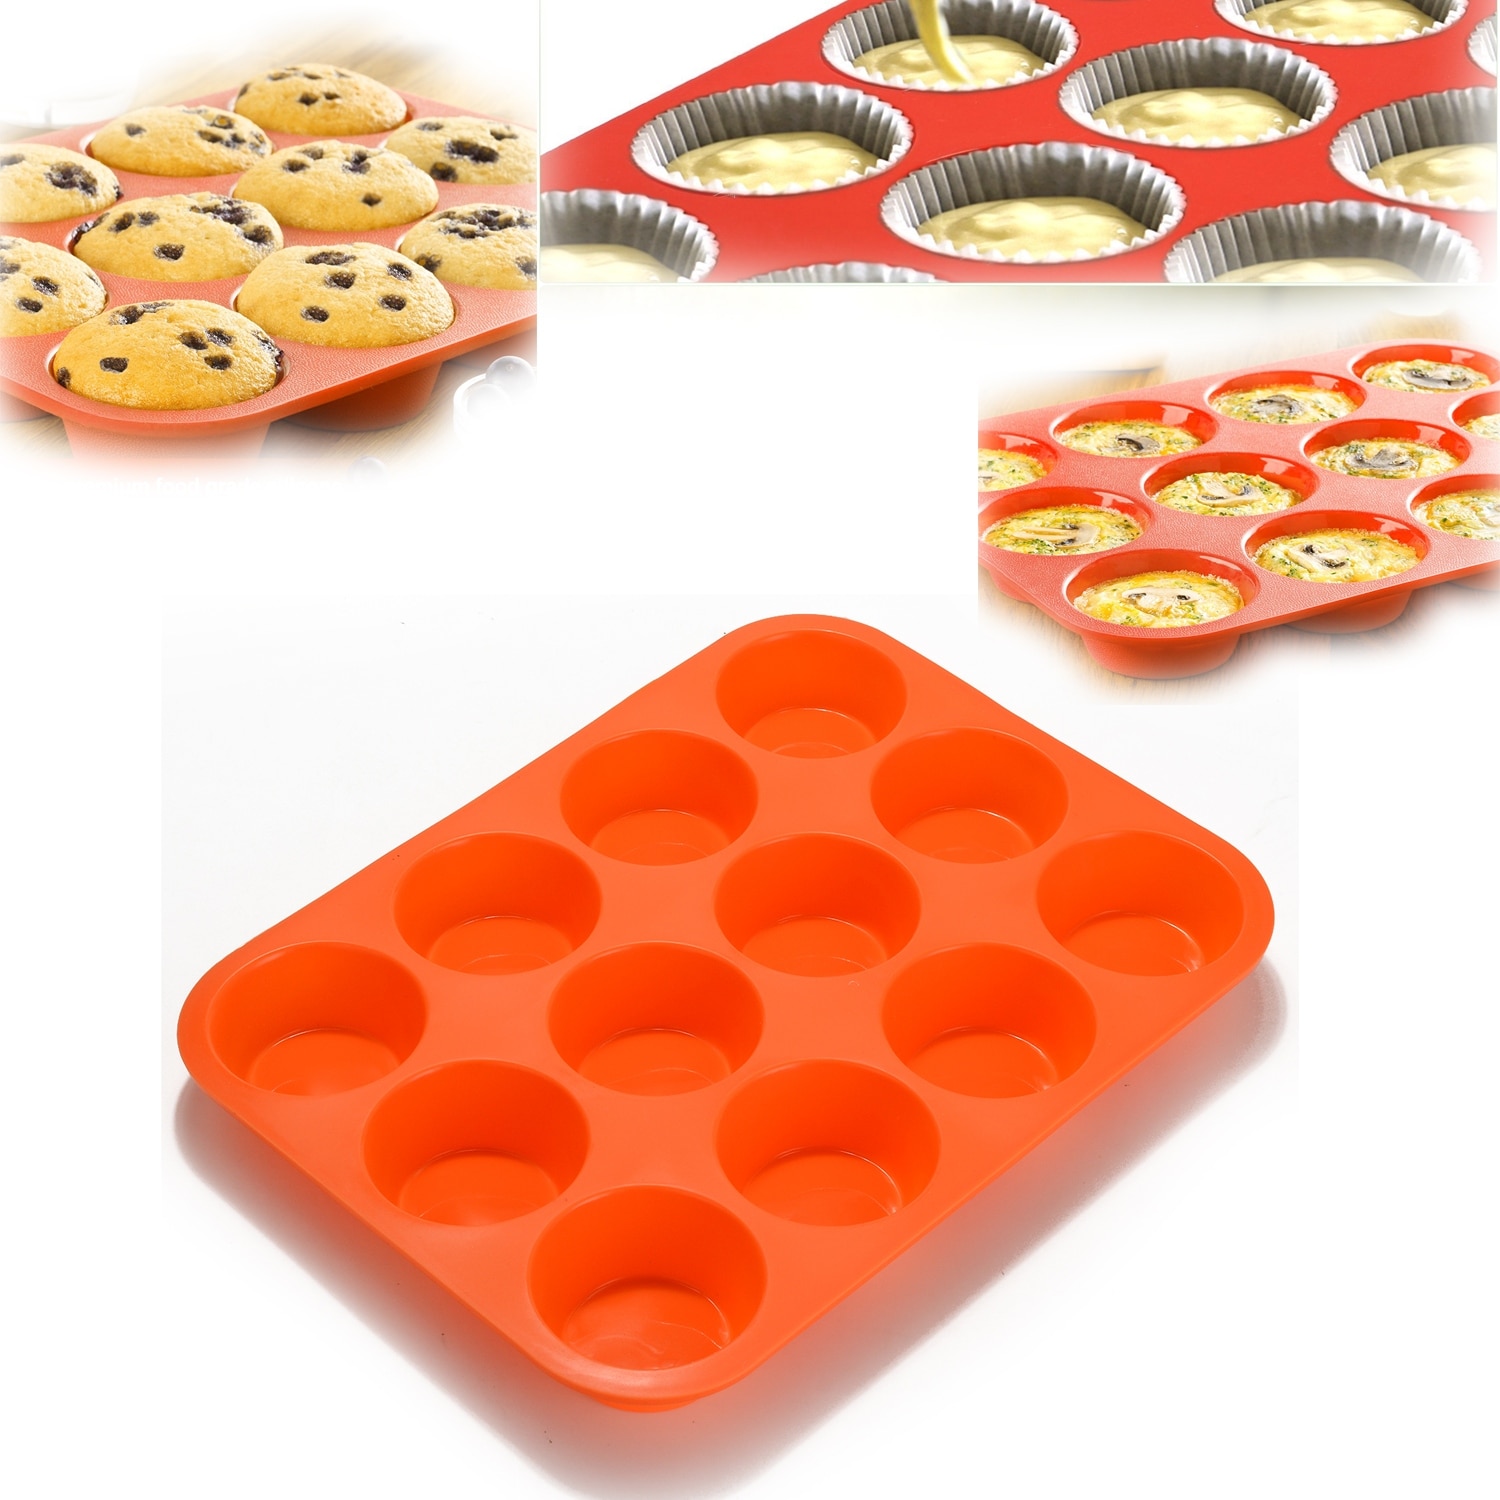 https://ak1.ostkcdn.com/images/products/is/images/direct/afe0437dd3796b915cf969149ee444297e151e71/Non-Stick-Silicone%C2%A0Muffin-Pans-for-Baking-BPA-Free.jpg